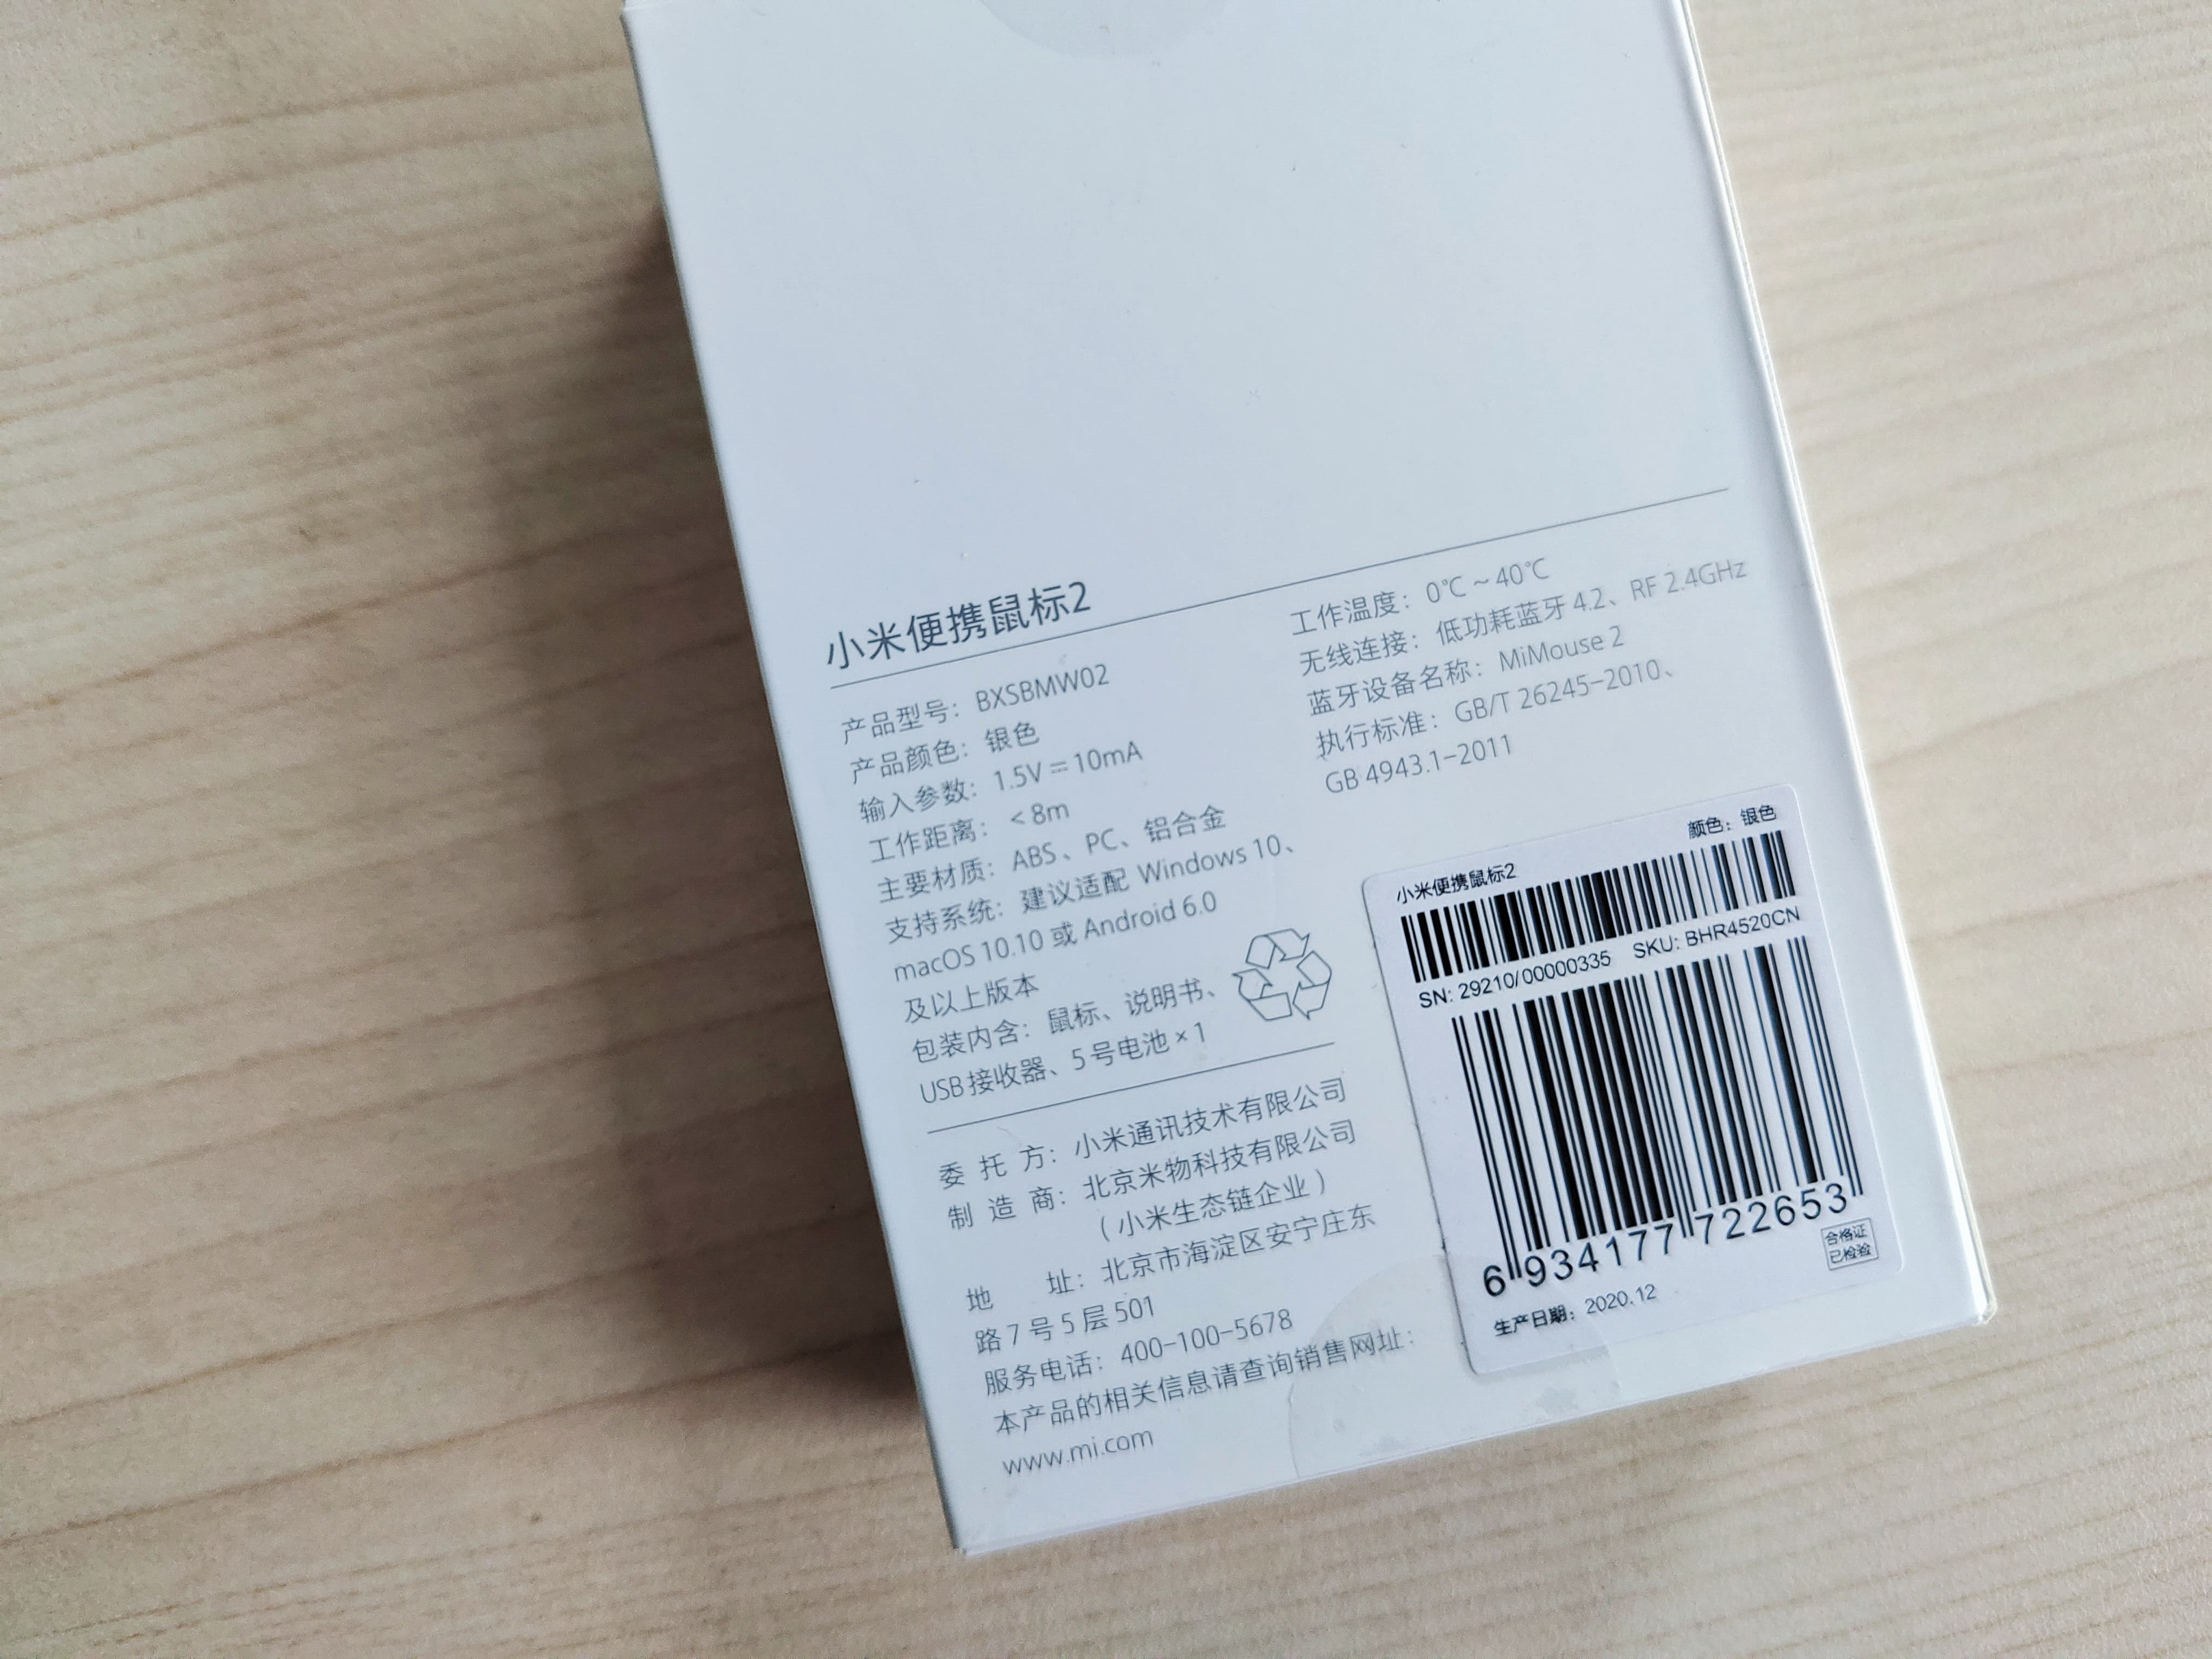 After 4 years, this product of Xiaomi has finally been updated